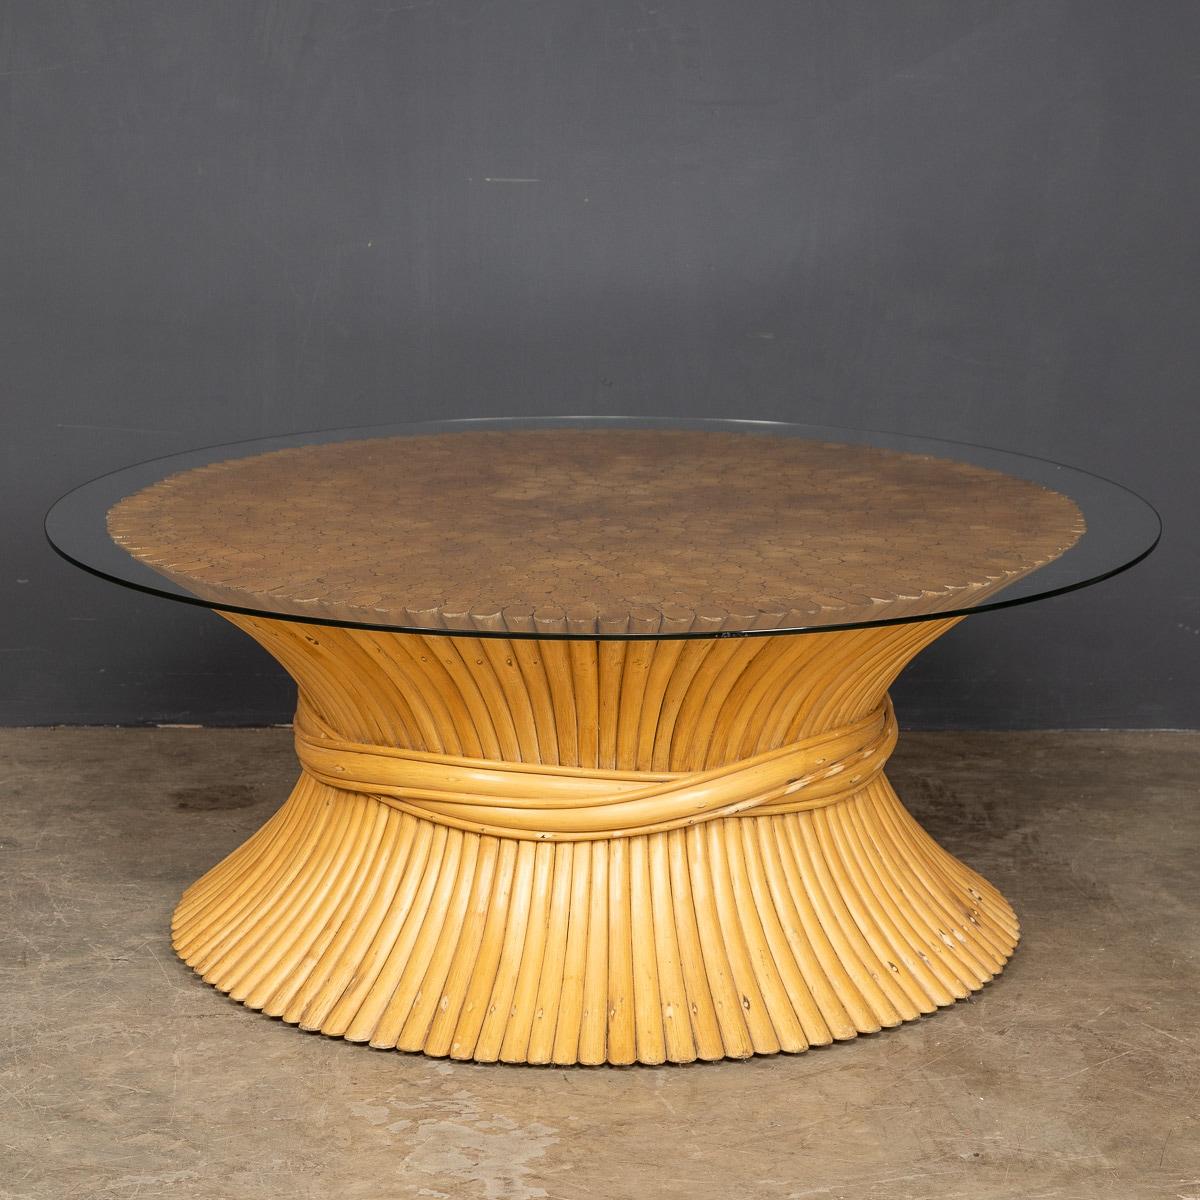 A good sized wheat sheaf coffee table by American designer John McGuire with the iconic bamboo base and glass top, c.1970s.

CONDITION
In Good Condition - wear consistent with age.

SIZE
Diameter: 103cm
Height: 42cm